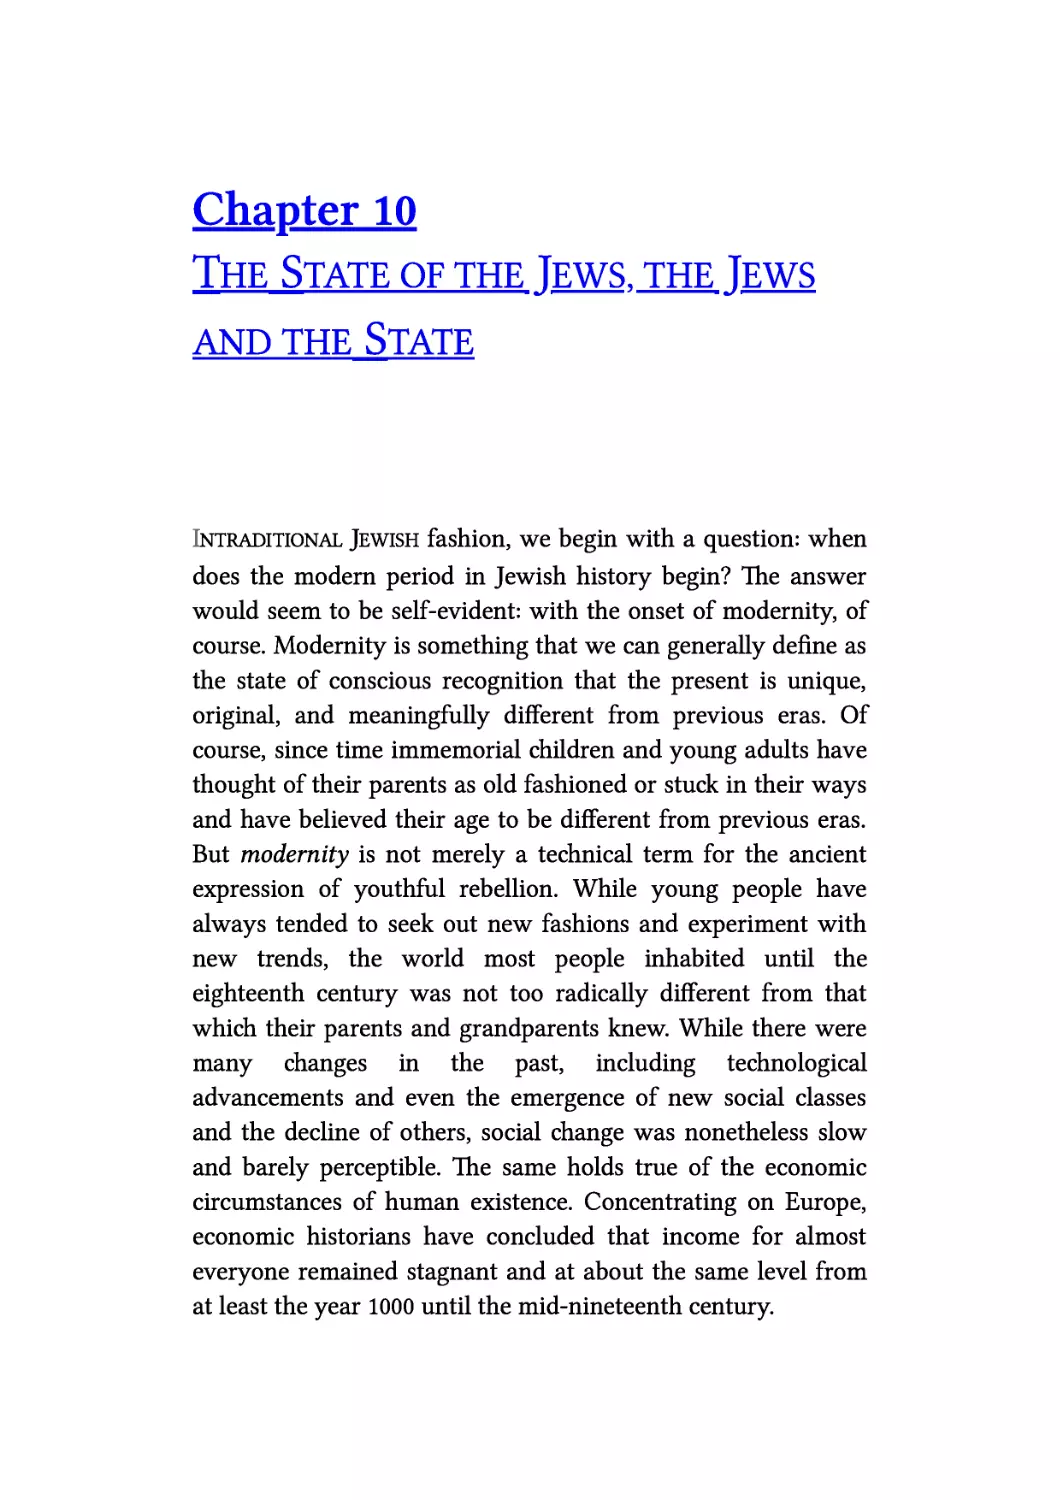 10. The State of the Jews, the Jews and the State